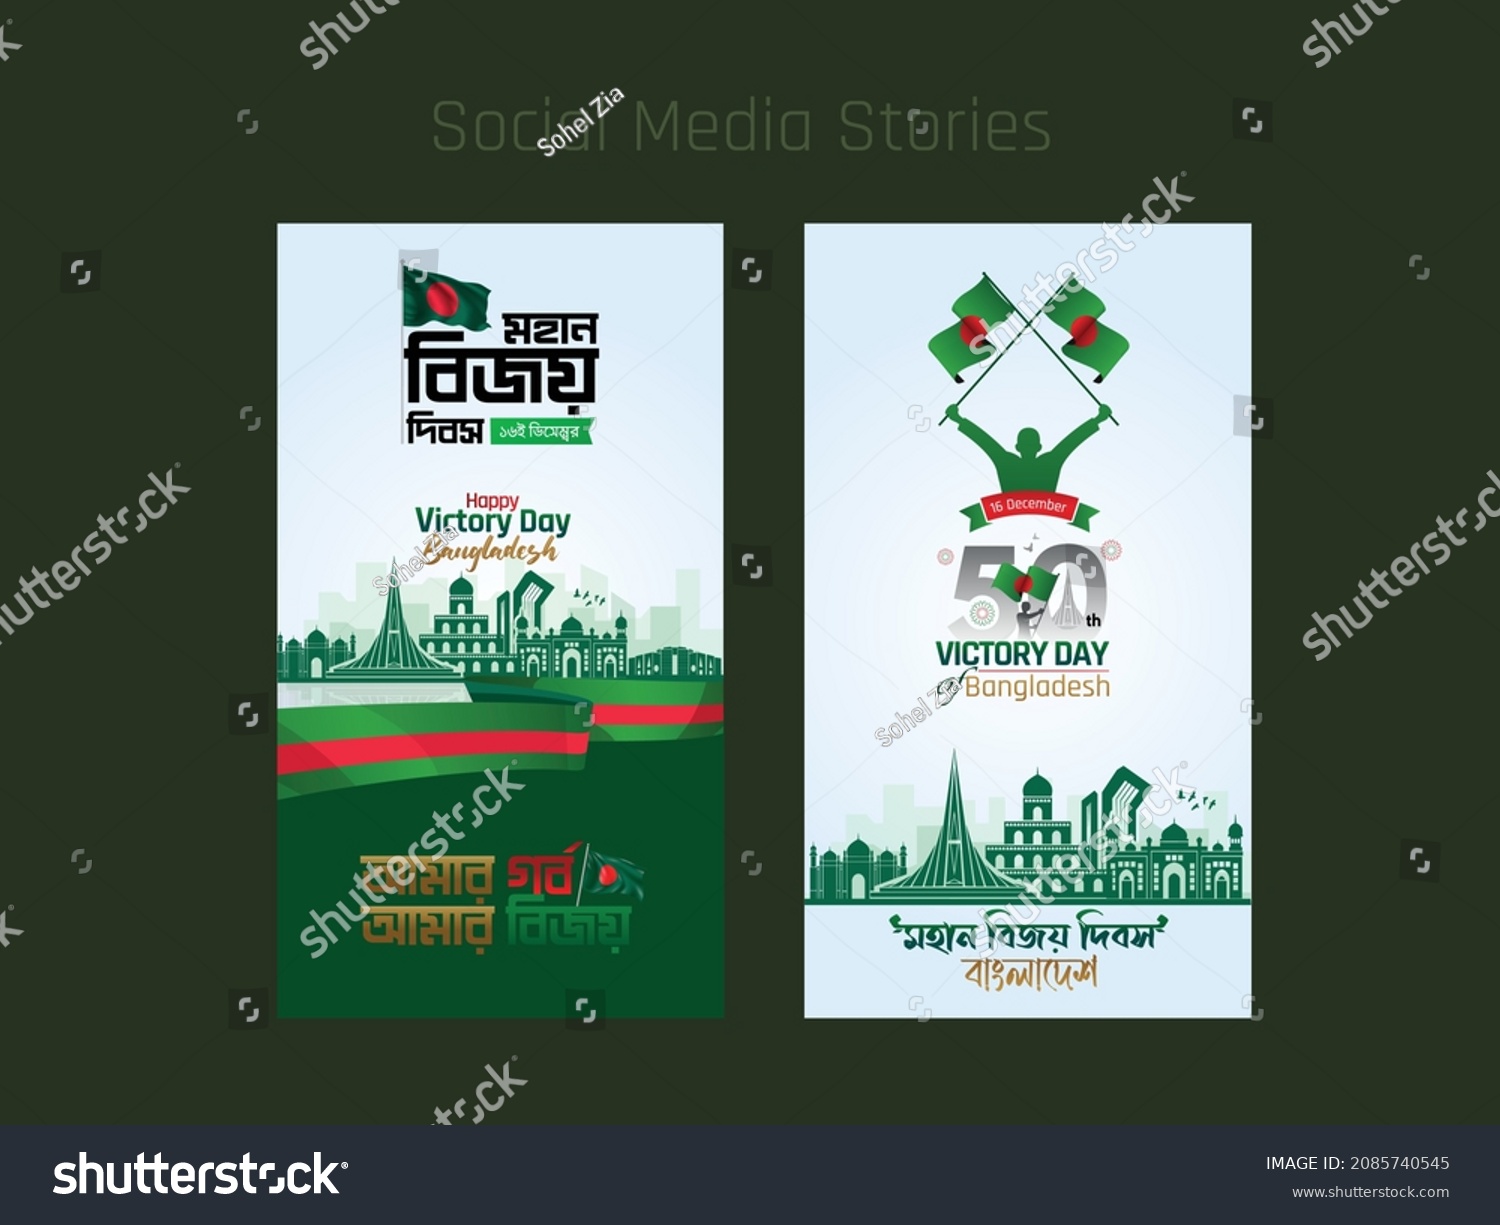 Bangladesh Victory day (16 December) social media stories collection #2085740545